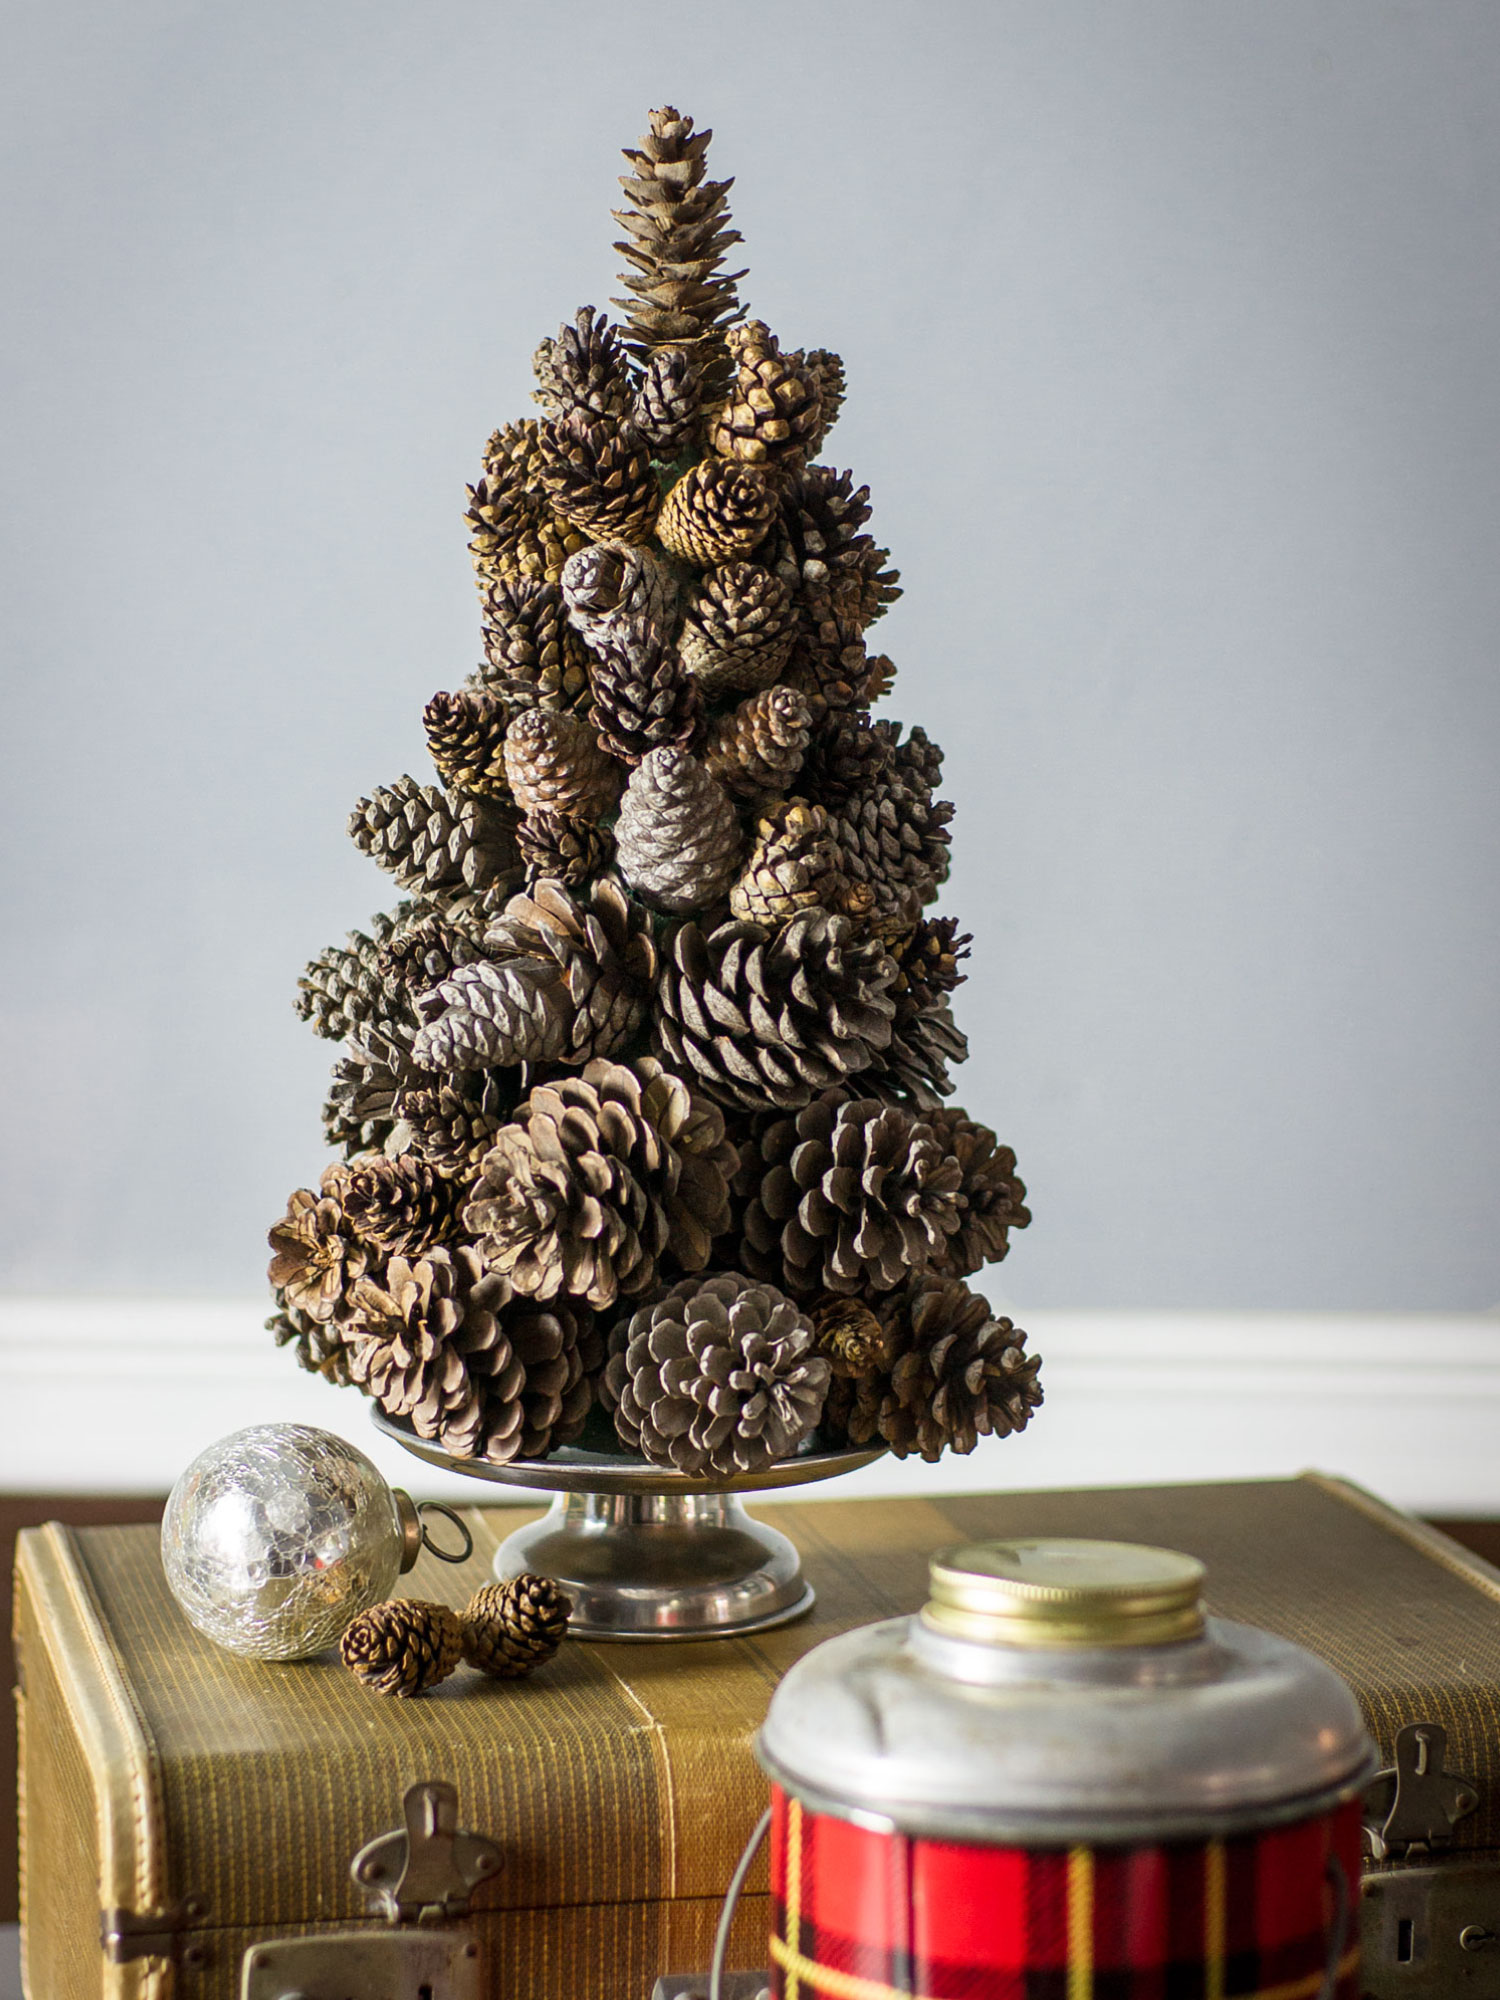 50PCS Mixed Size Natural Pine Cone Pinecone for Christmas Decor Rustic STYLE 